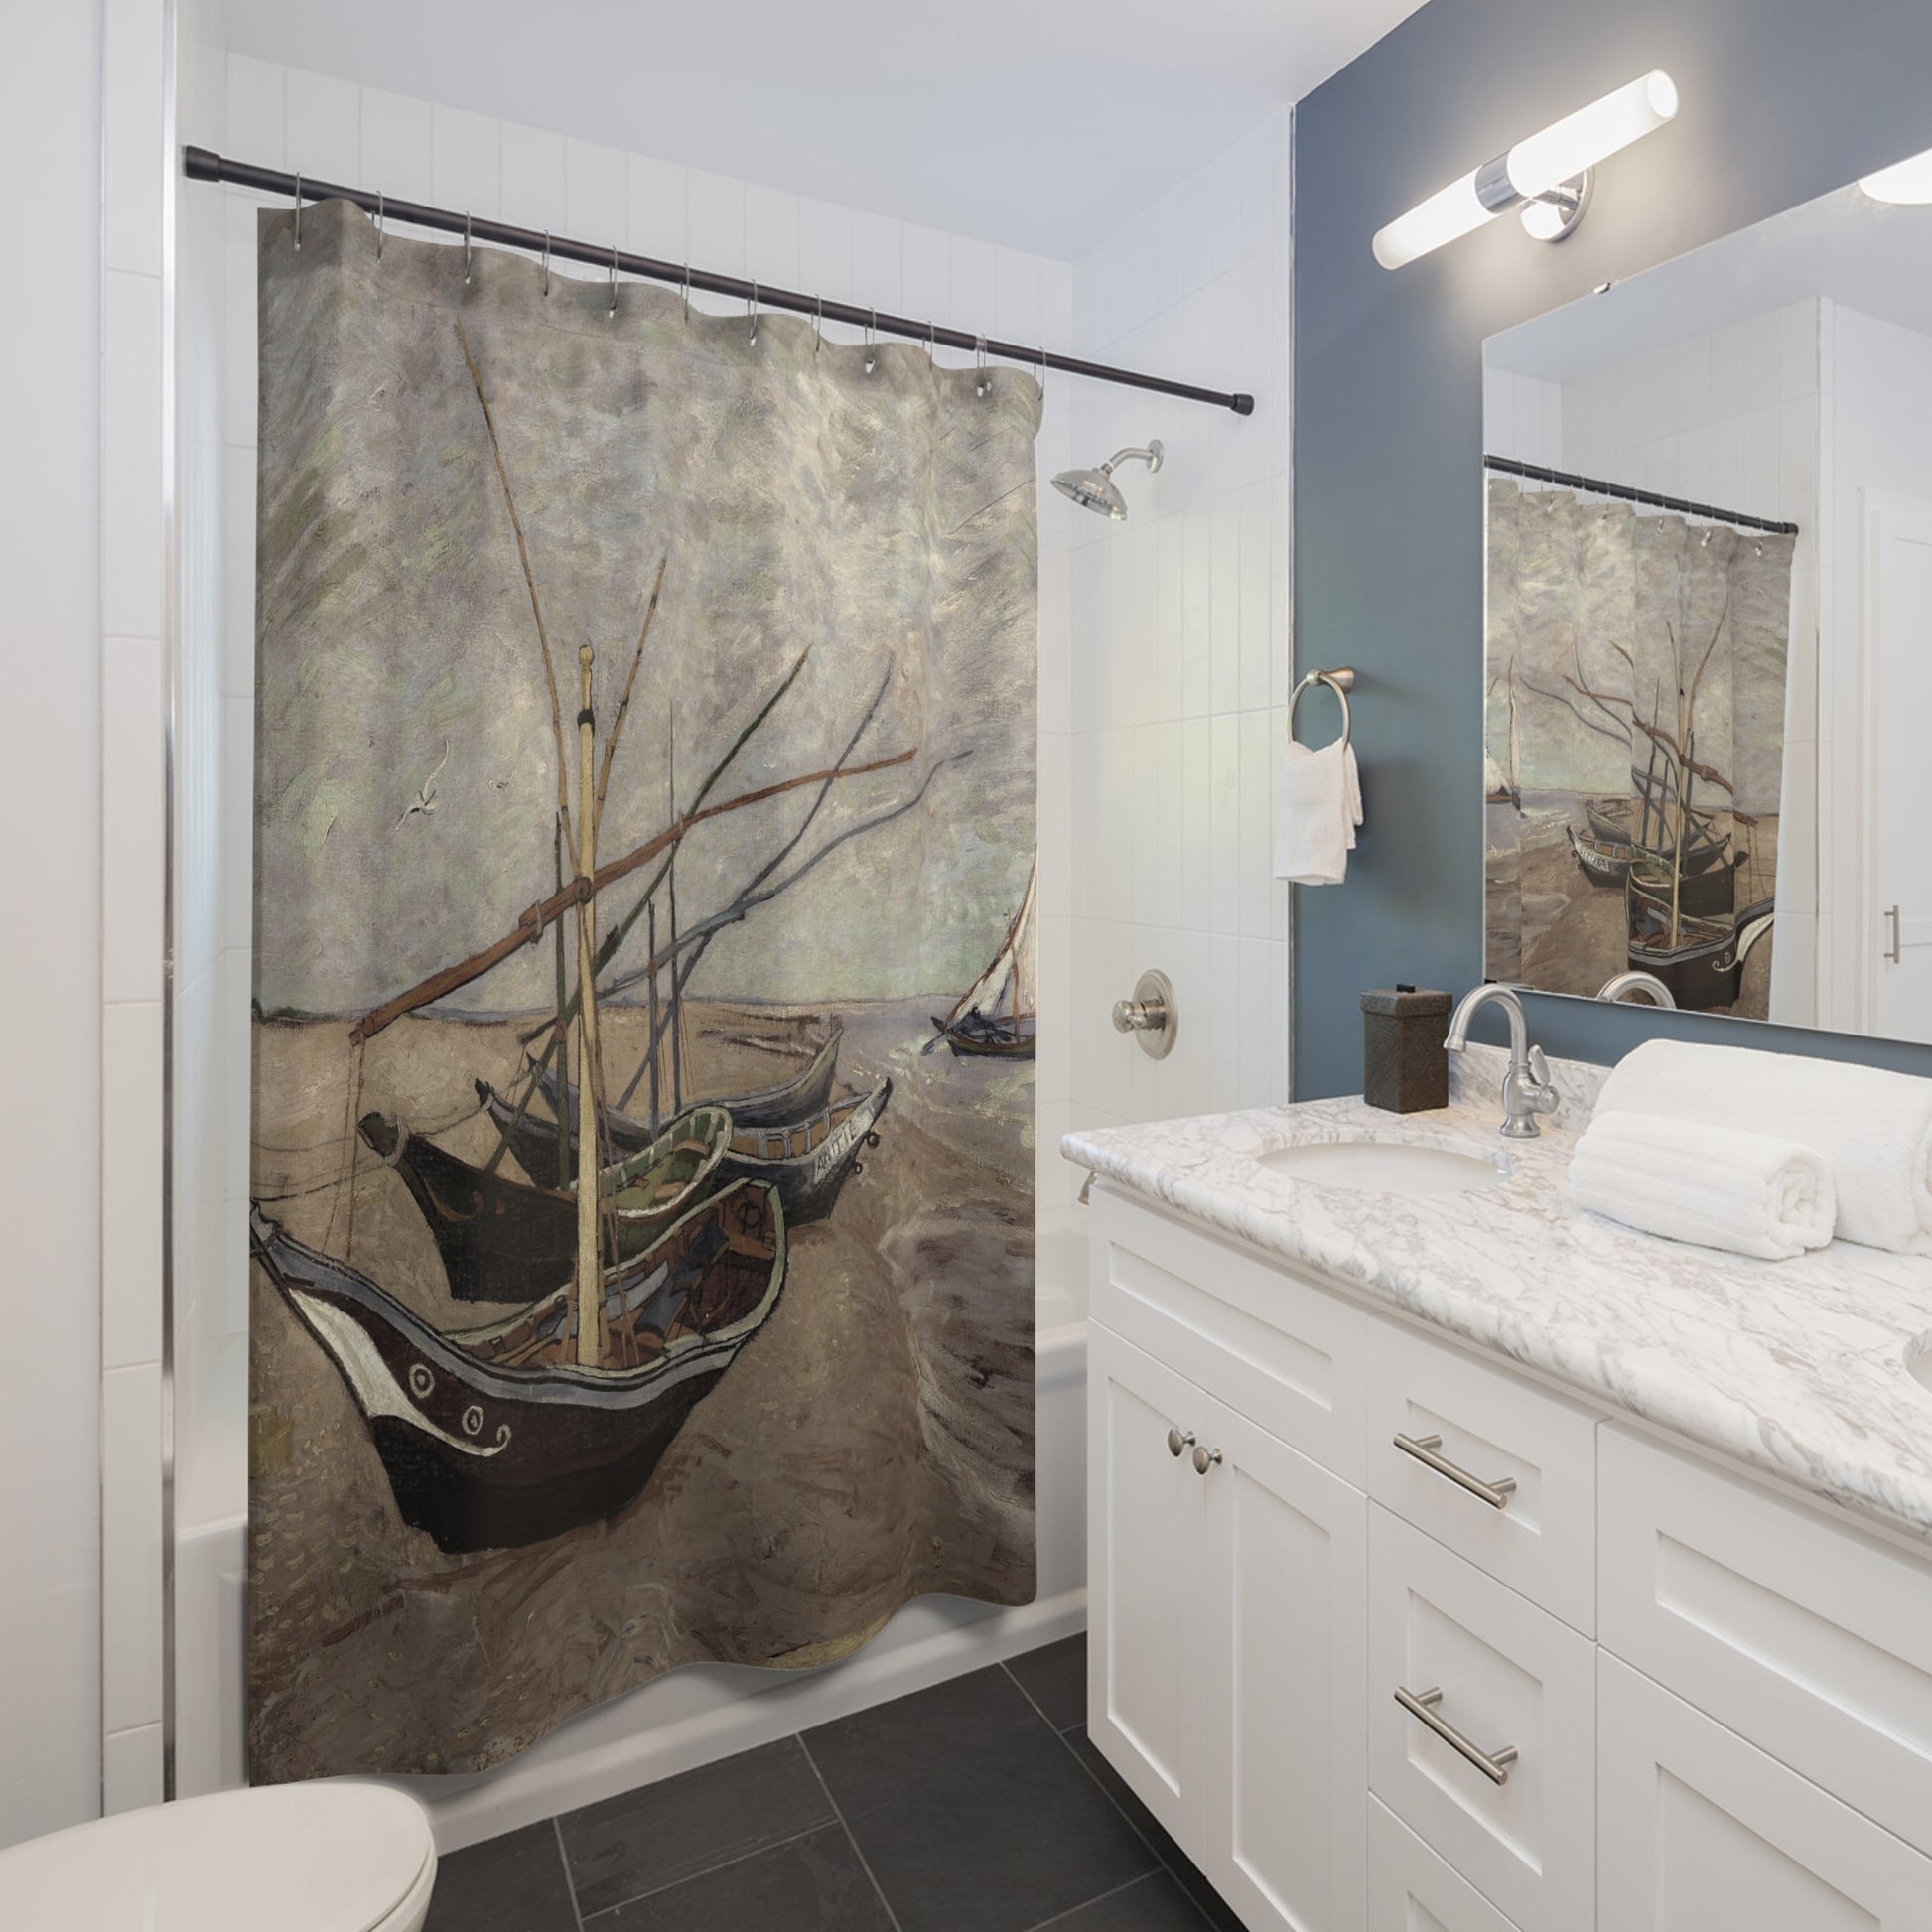 Costal Shower Curtain Best Bathroom Decorating Ideas for Seascapes Decor